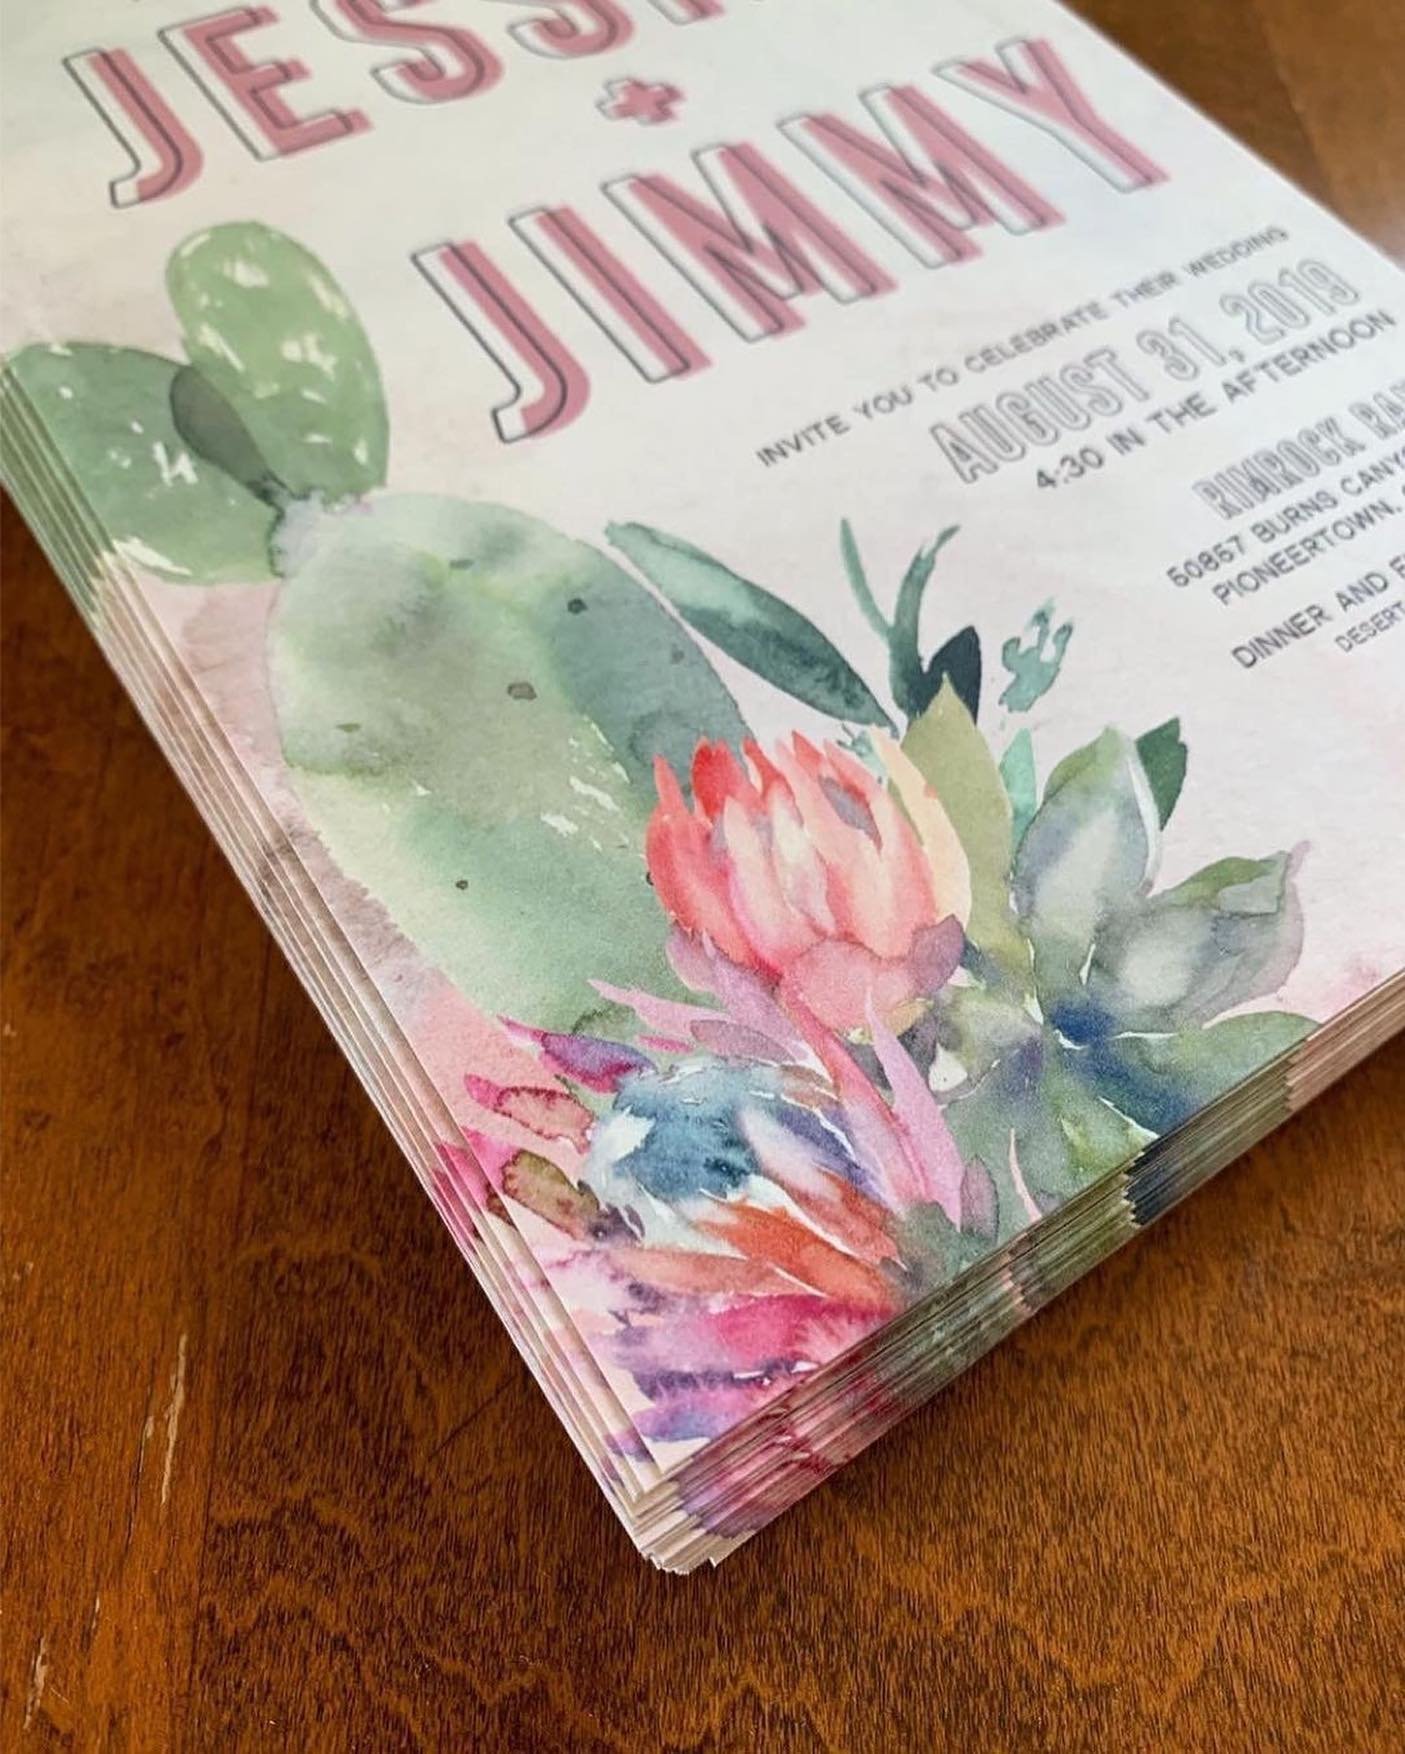 Cacti, Proteas and Succulents, oh my! 🌵Sending some desert vibes on this bitterly cold day (it might get up to 1 degree today 🥶) Stay warm, friends! 

#wedding #joshuatree #rimrockranch #cactus #protea #succulents #weddinginvitation #papergoods #we